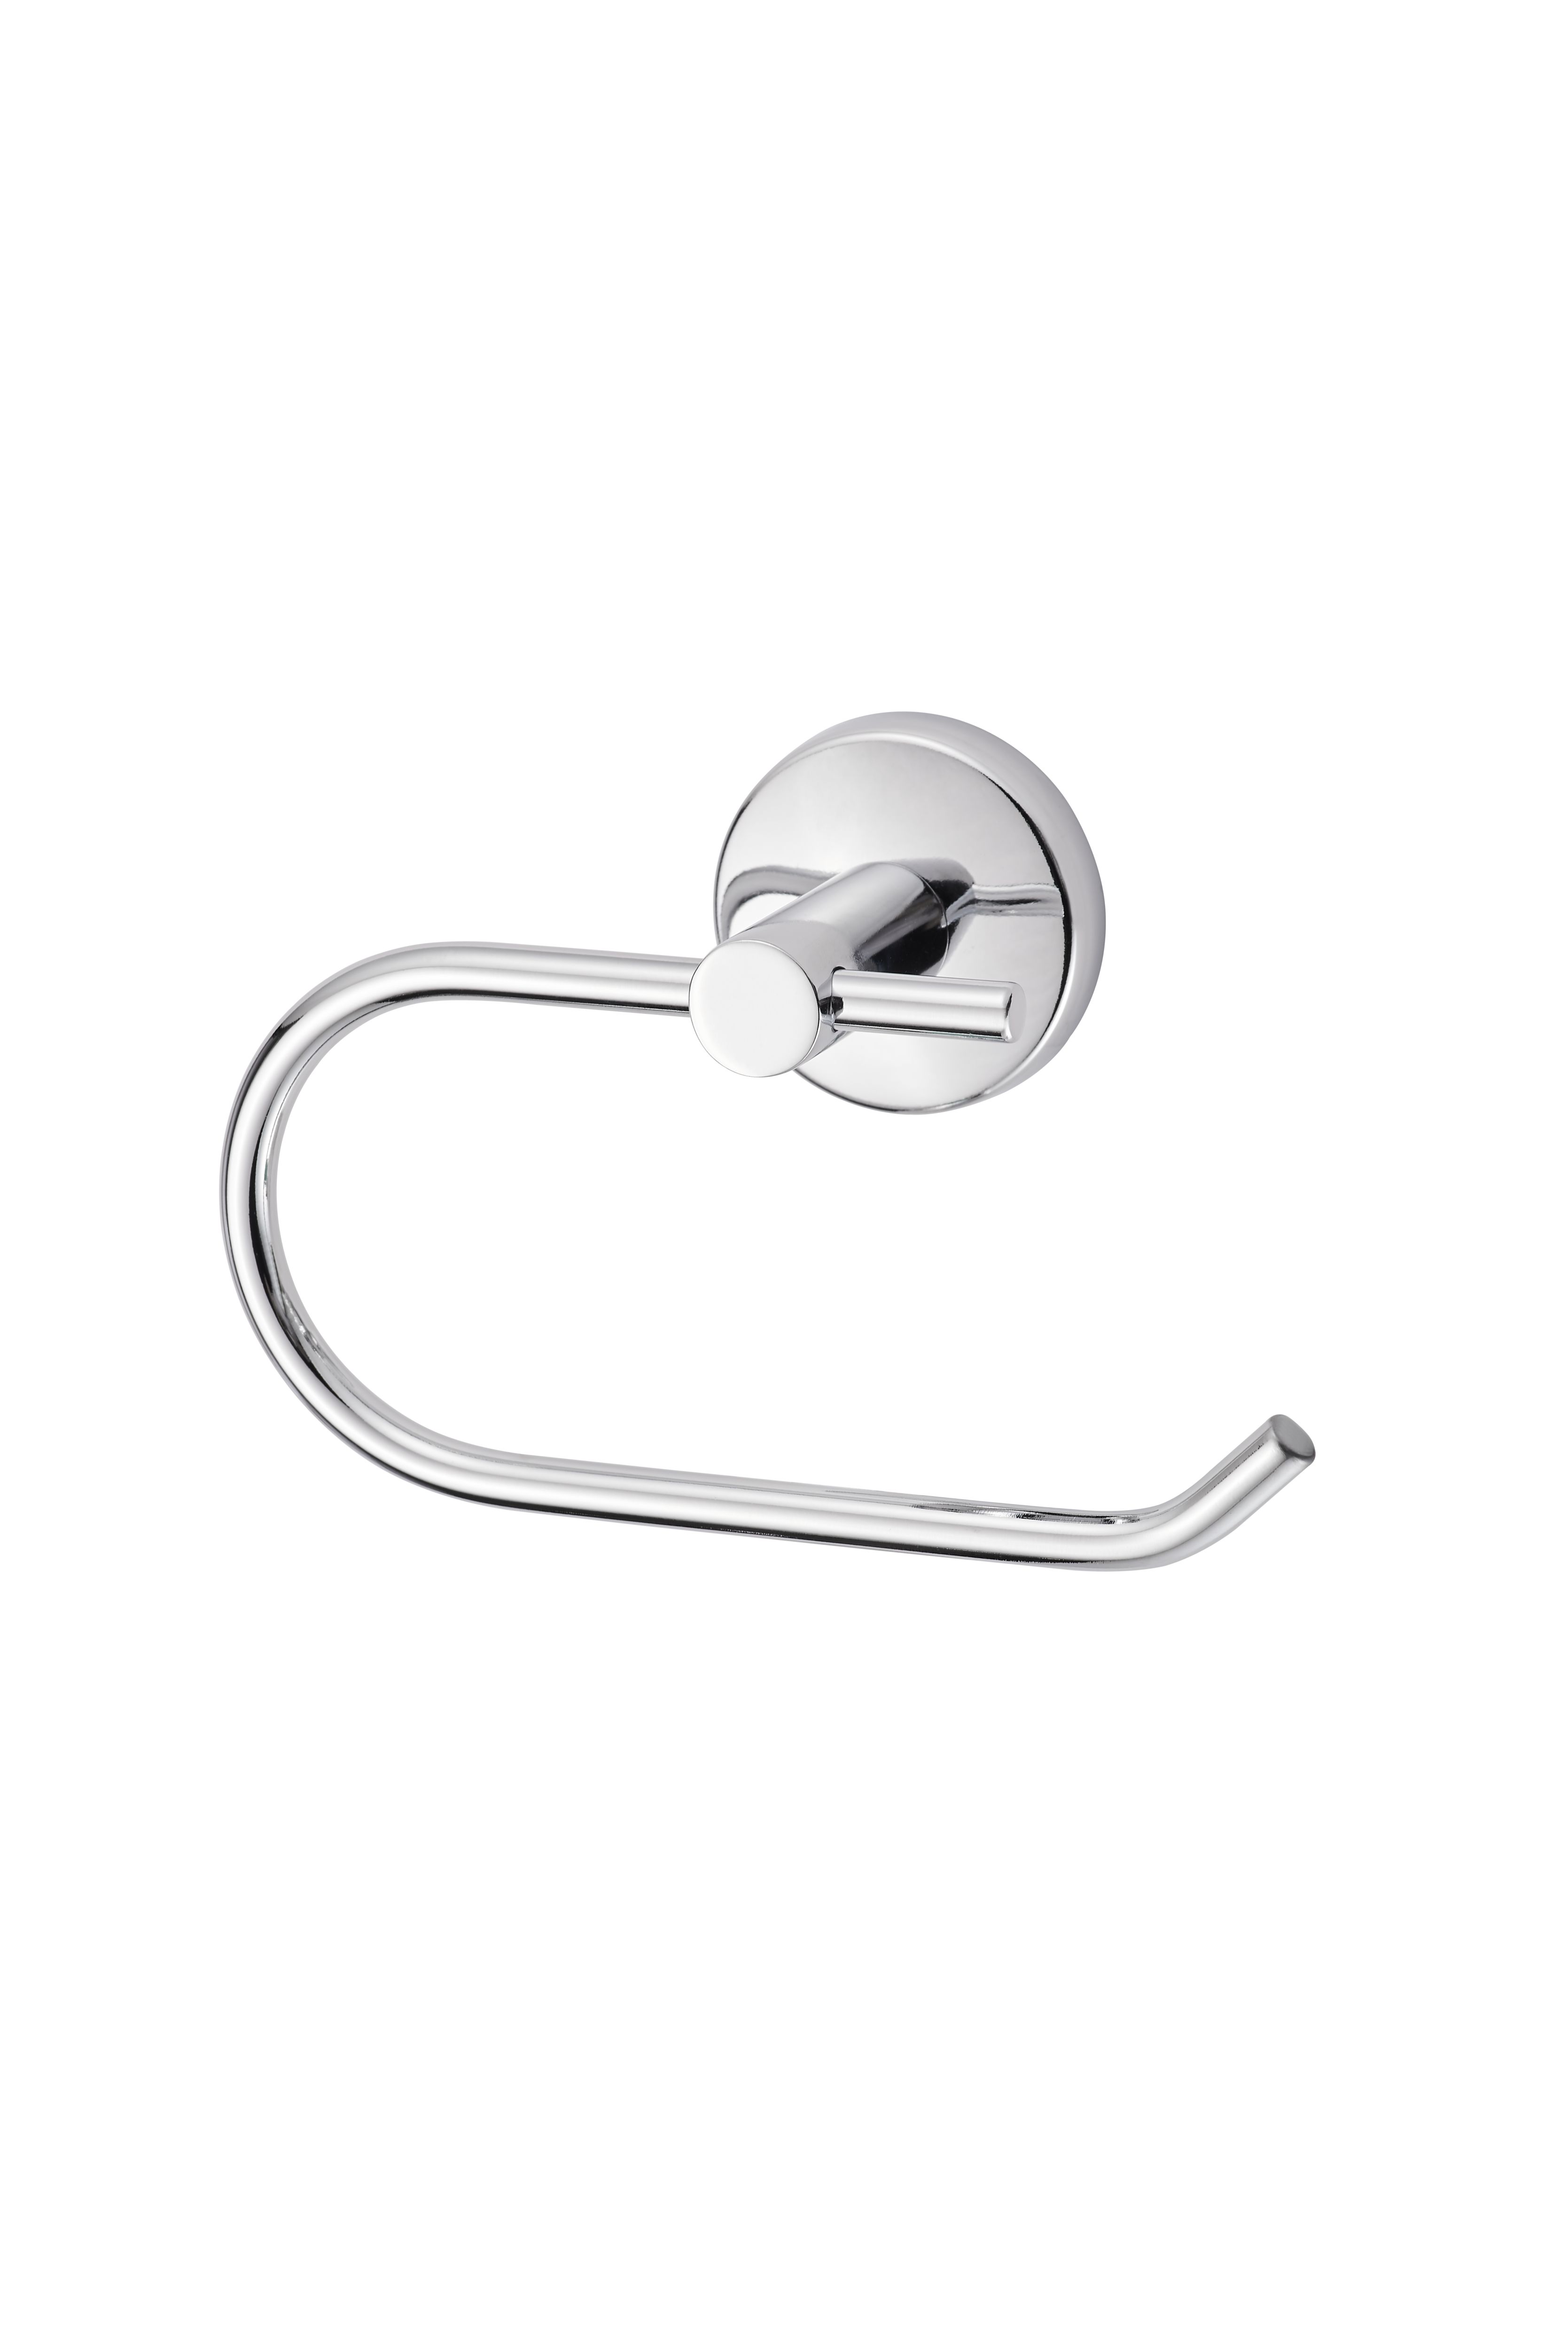 GoodHome Ormara Silver effect Toilet roll holder